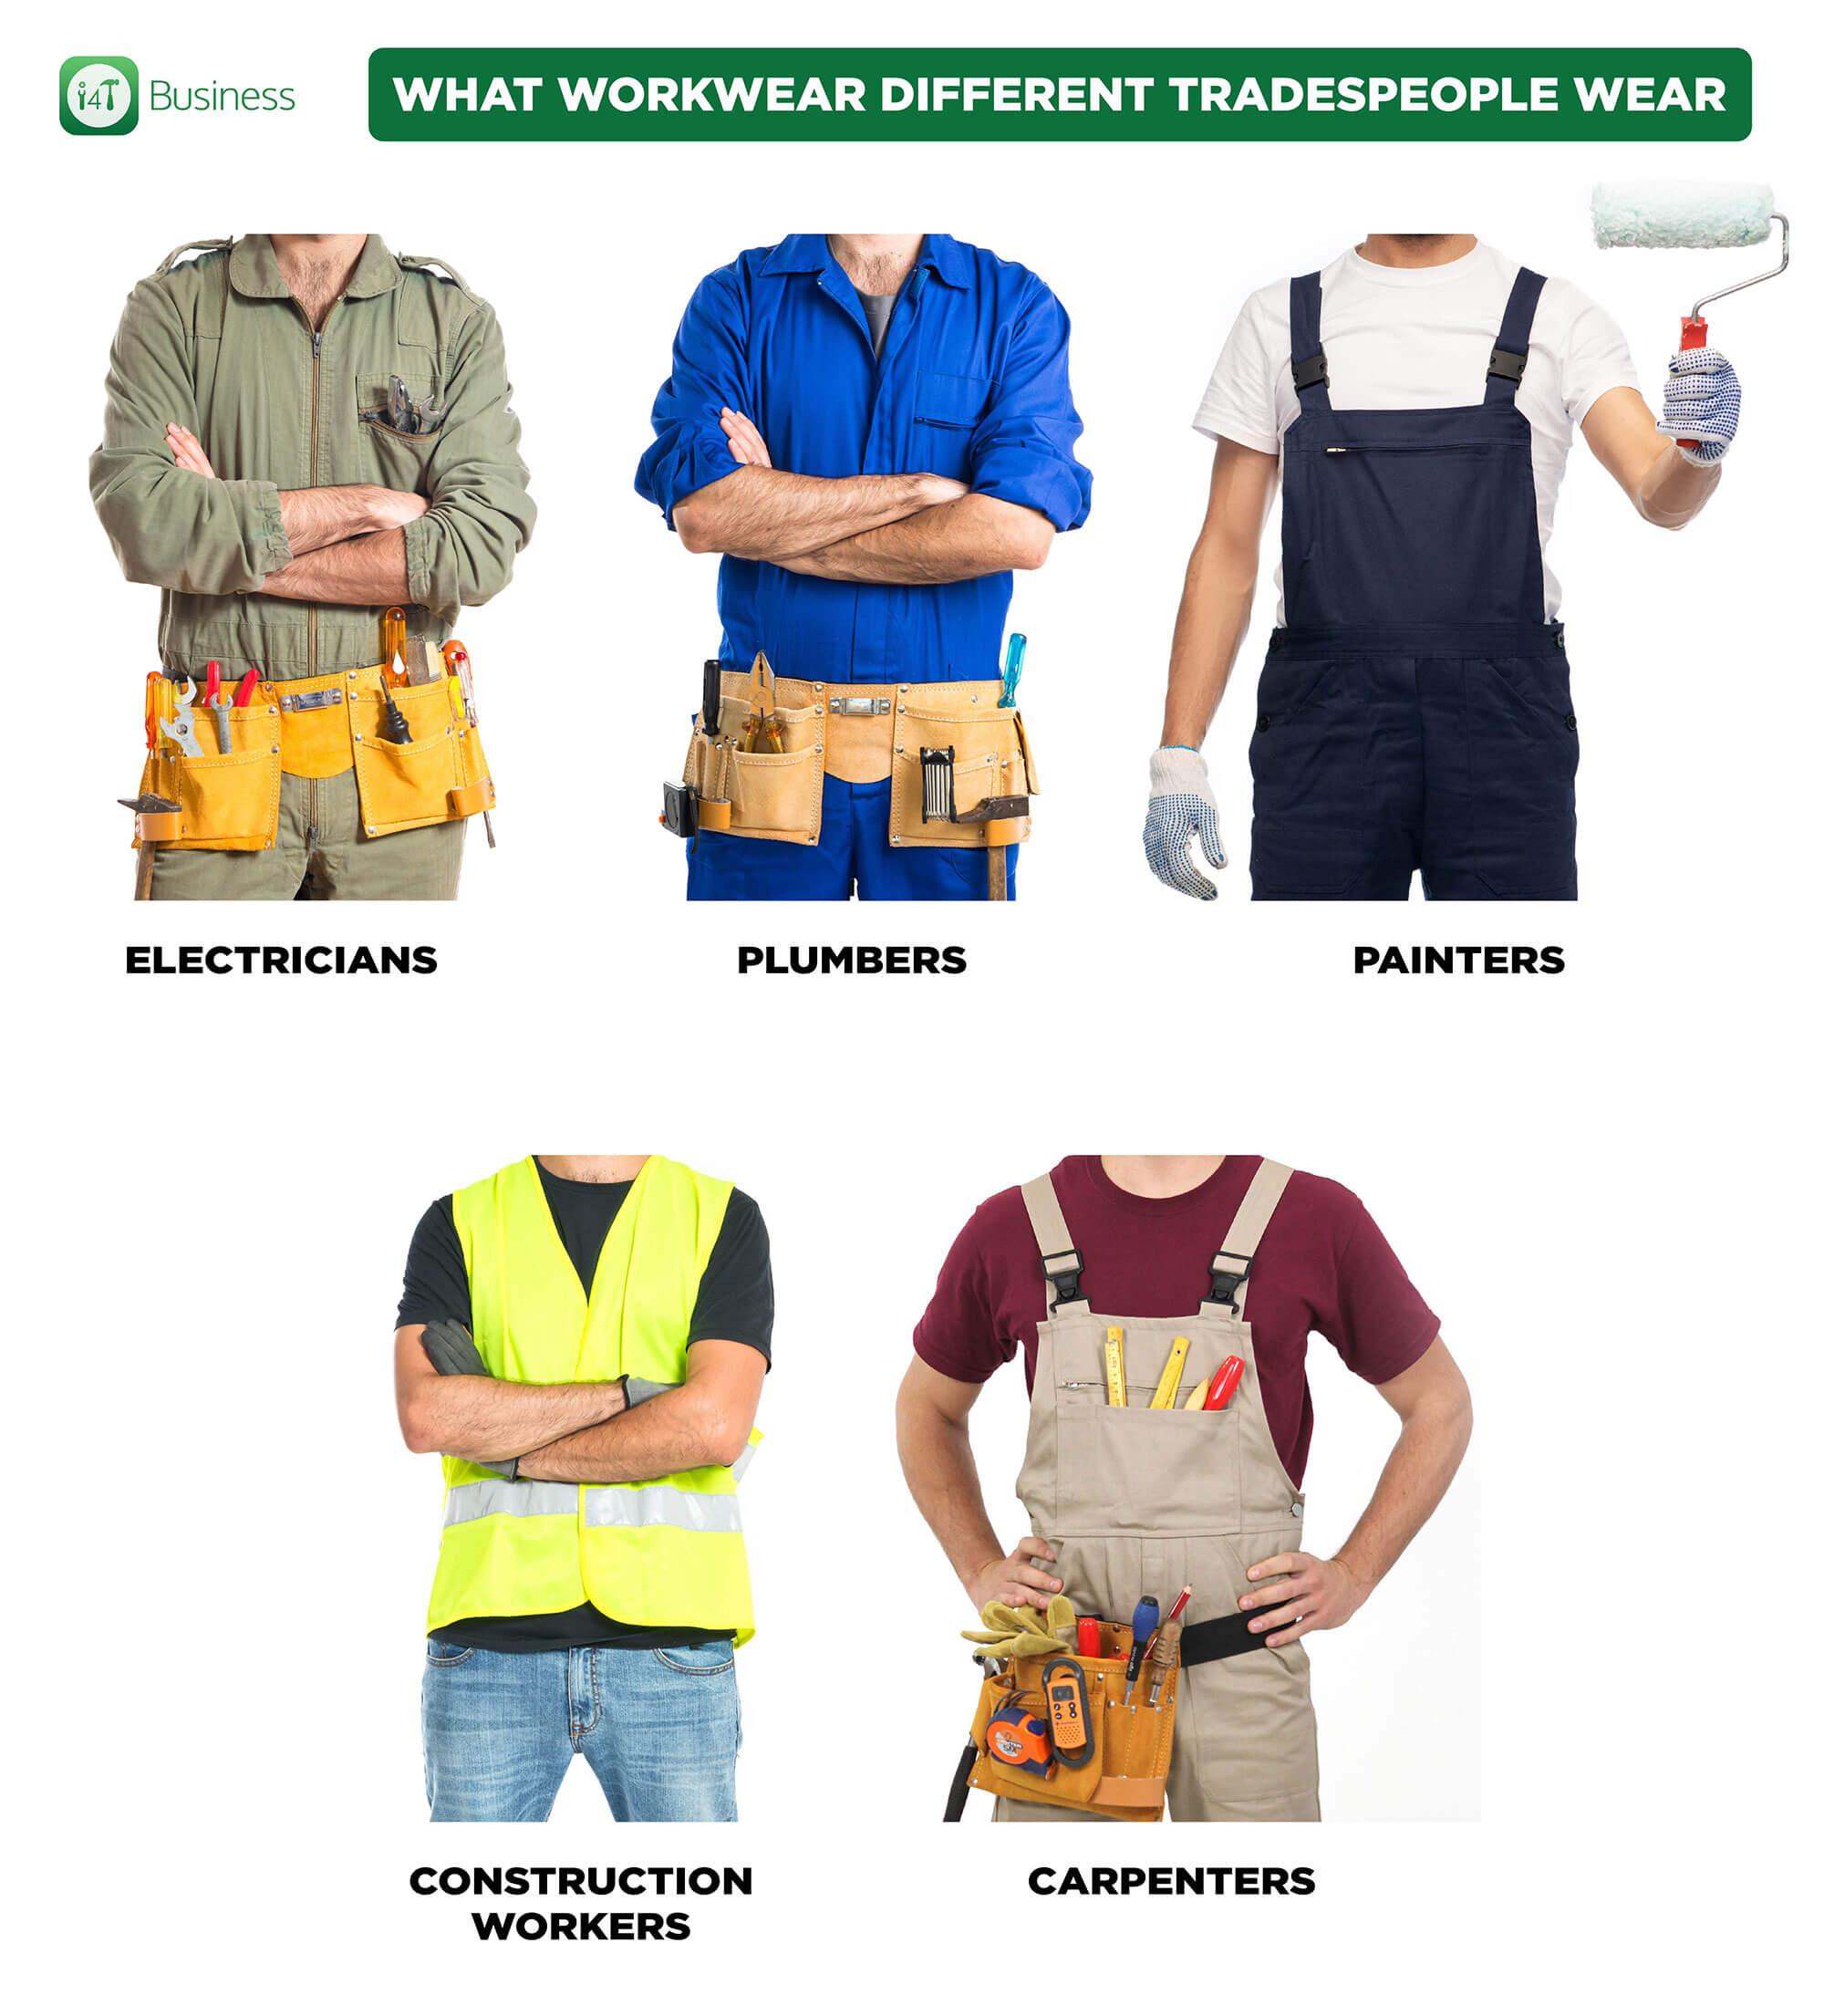 Workwear that different types of tradespeople wear - i4T Global